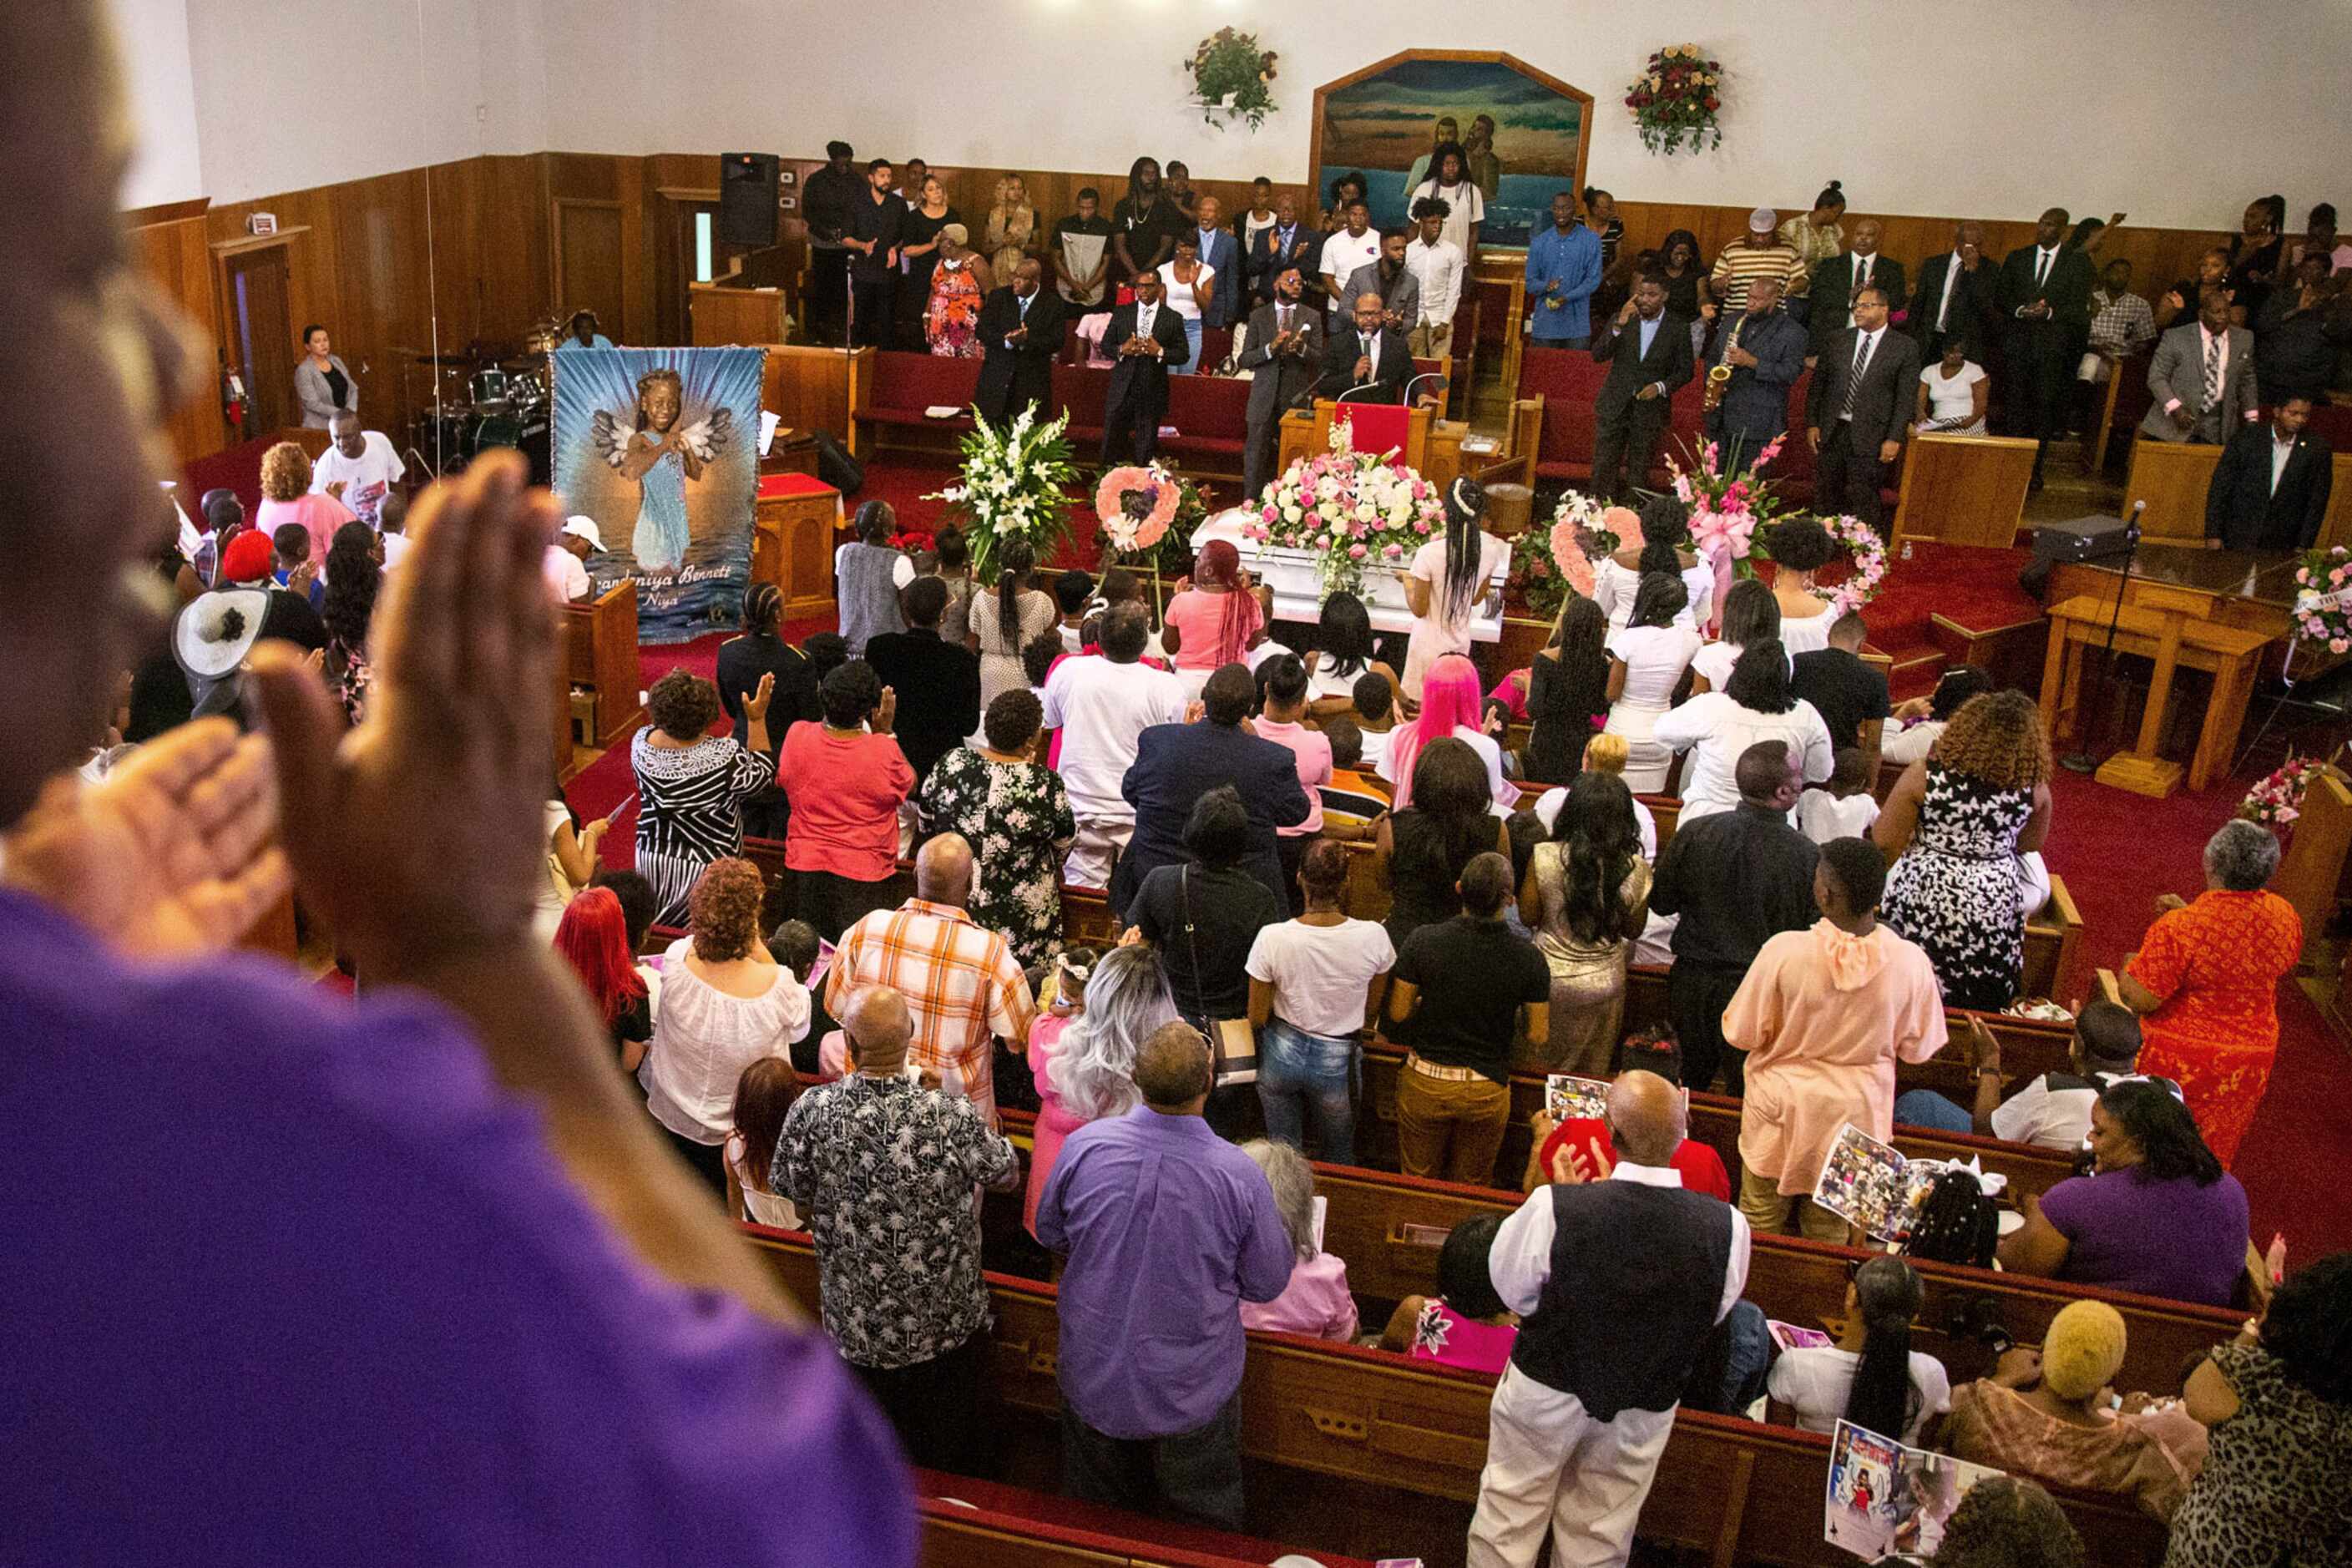 Mourners fill the pews at New Morning Star Missionary Baptist Church for BrandoniyaÕs funeral.